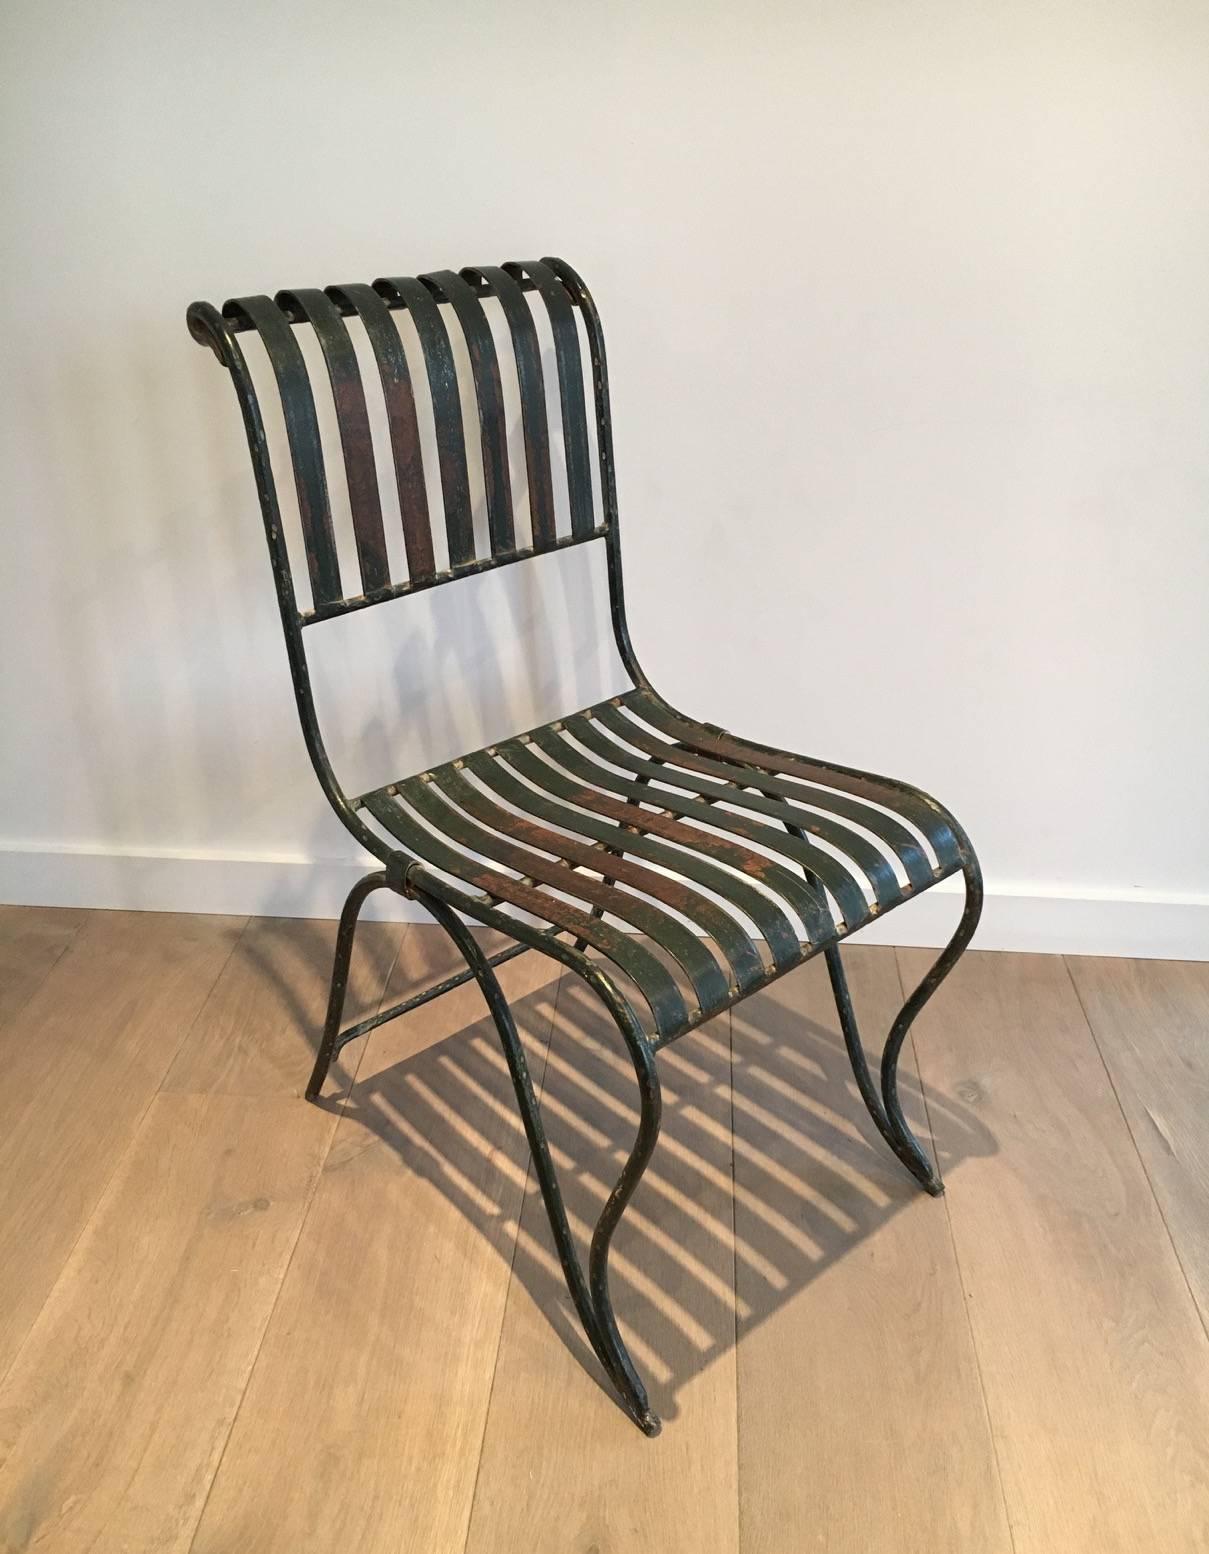 Painted French Wrought Iron Garden Chair